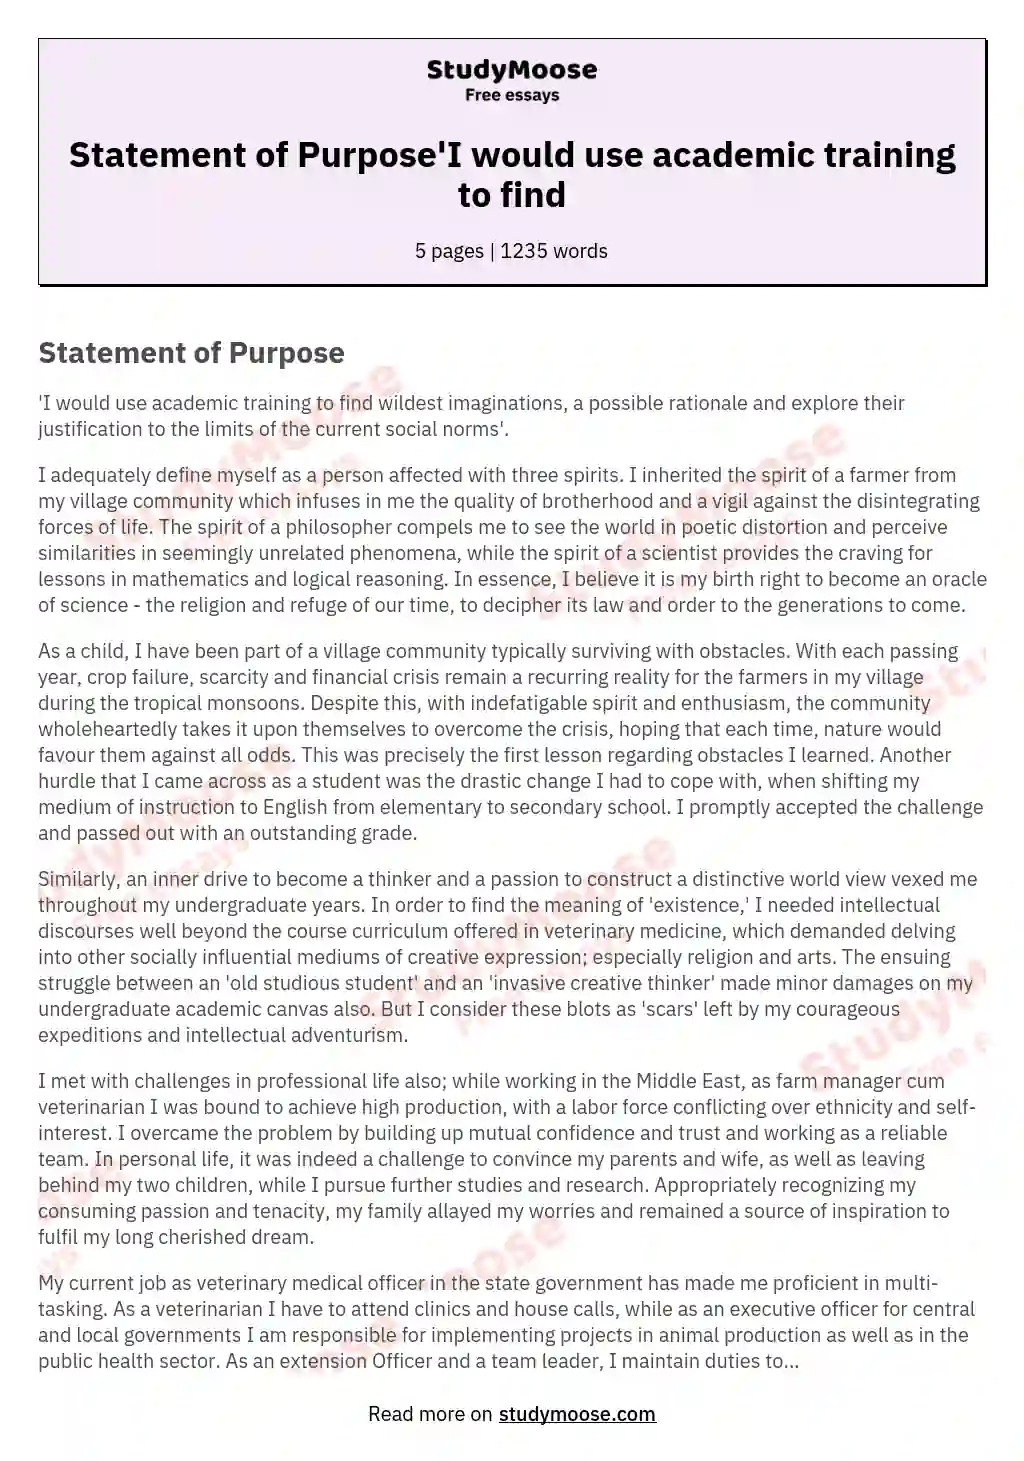 Statement of Purpose'I would use academic training to find essay